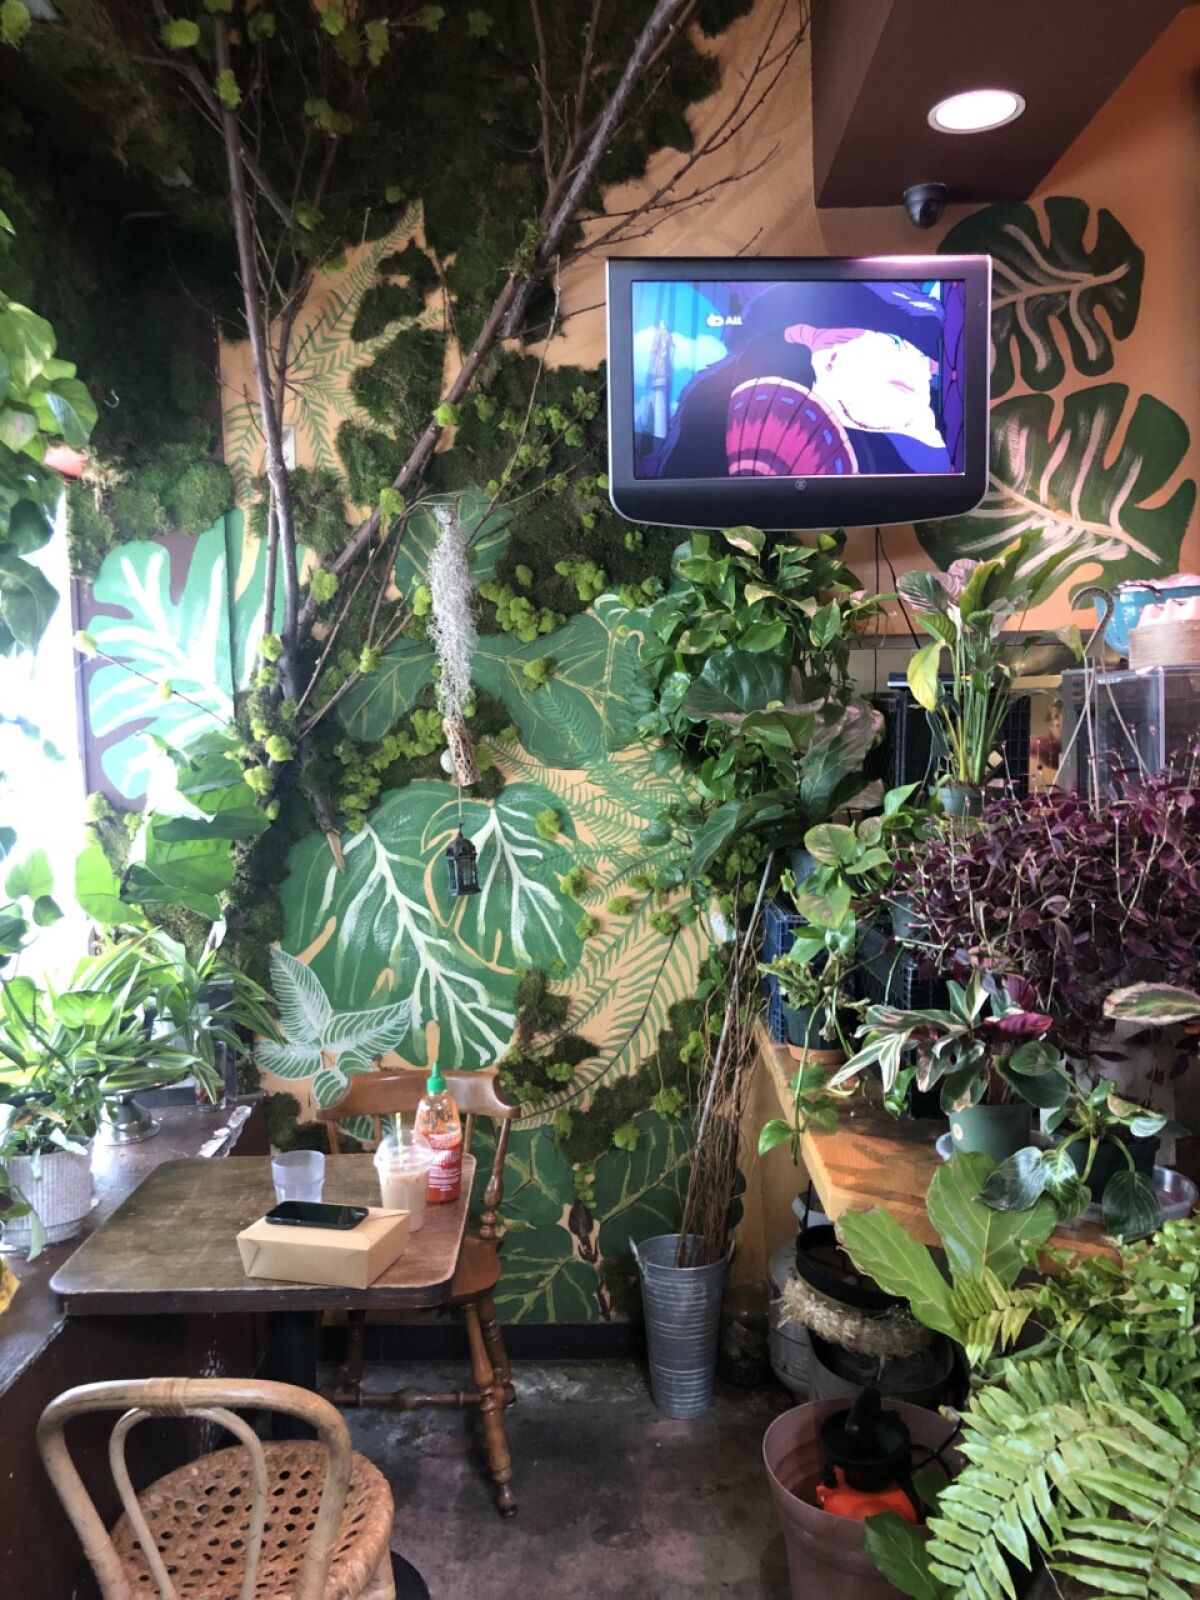 An animated film screens on a green wall of plants.